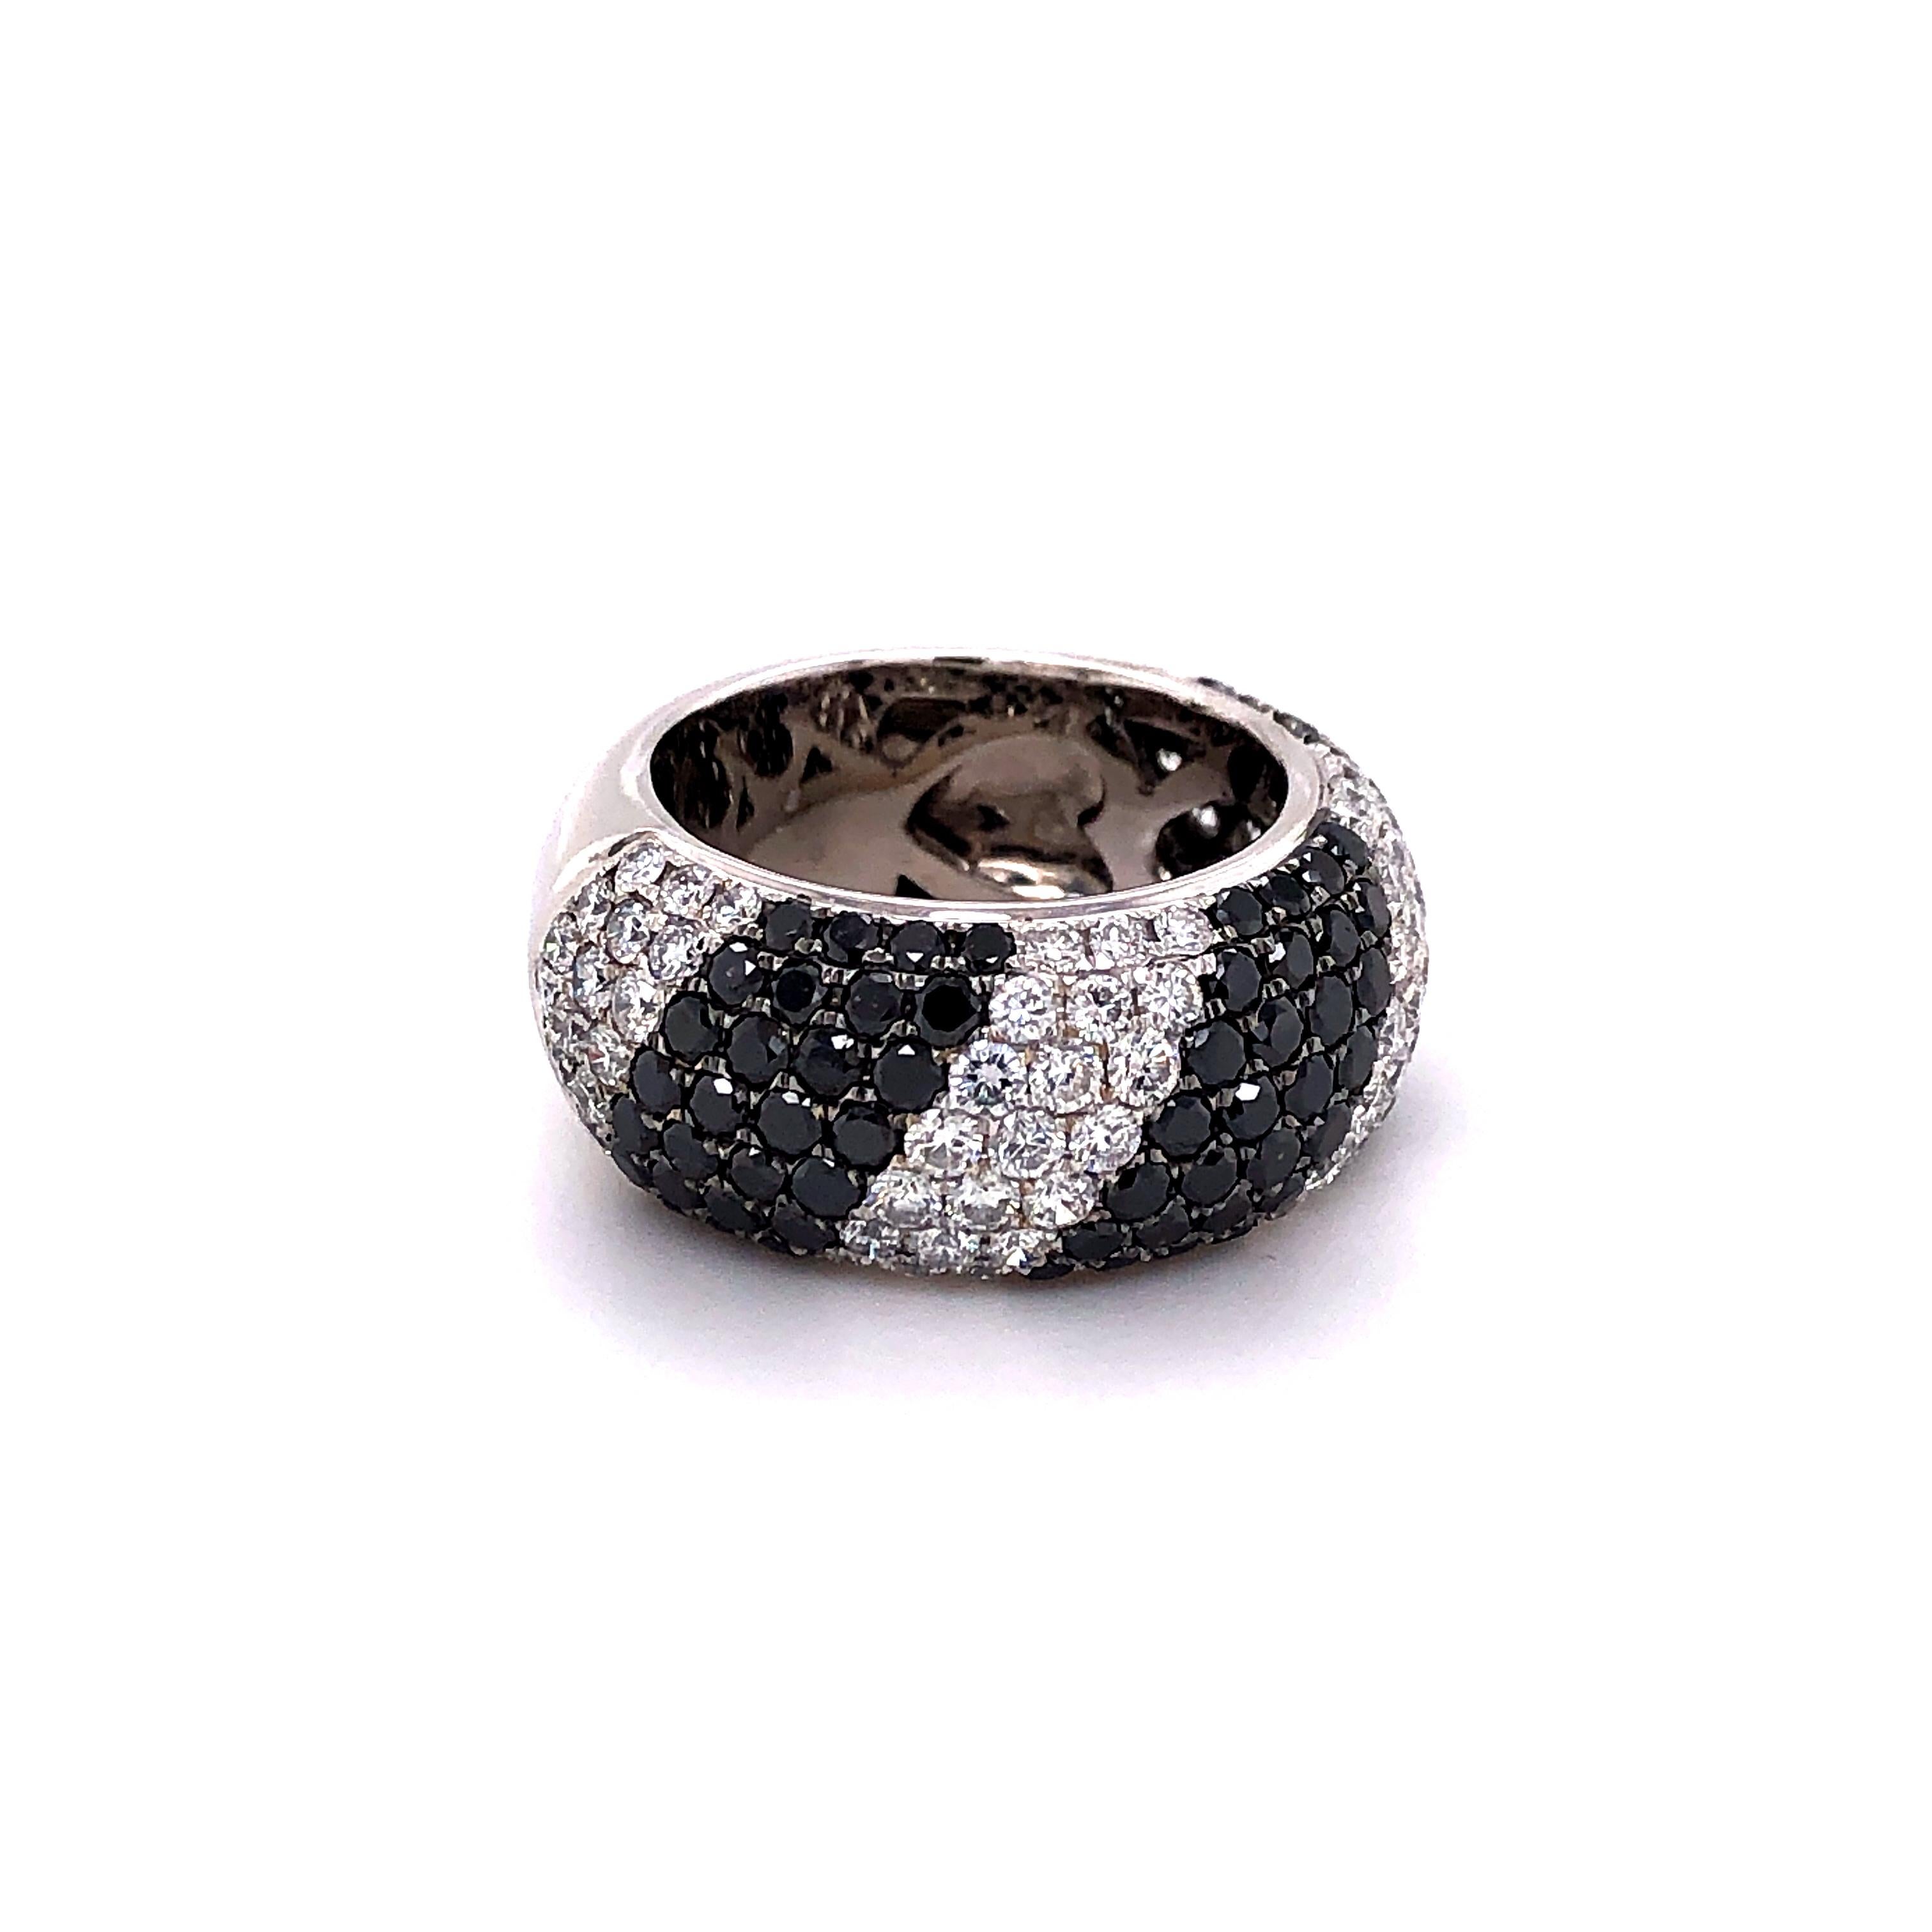 Fresh look with zebra like stripes in black and white diamonds. 41 brilliant cut diamonds with a total weight of 2.30 carats alternate with 147 brilliant cut diamonds of G/H color and vs clarity with a total weight of 2.70 carats
Heart shaped